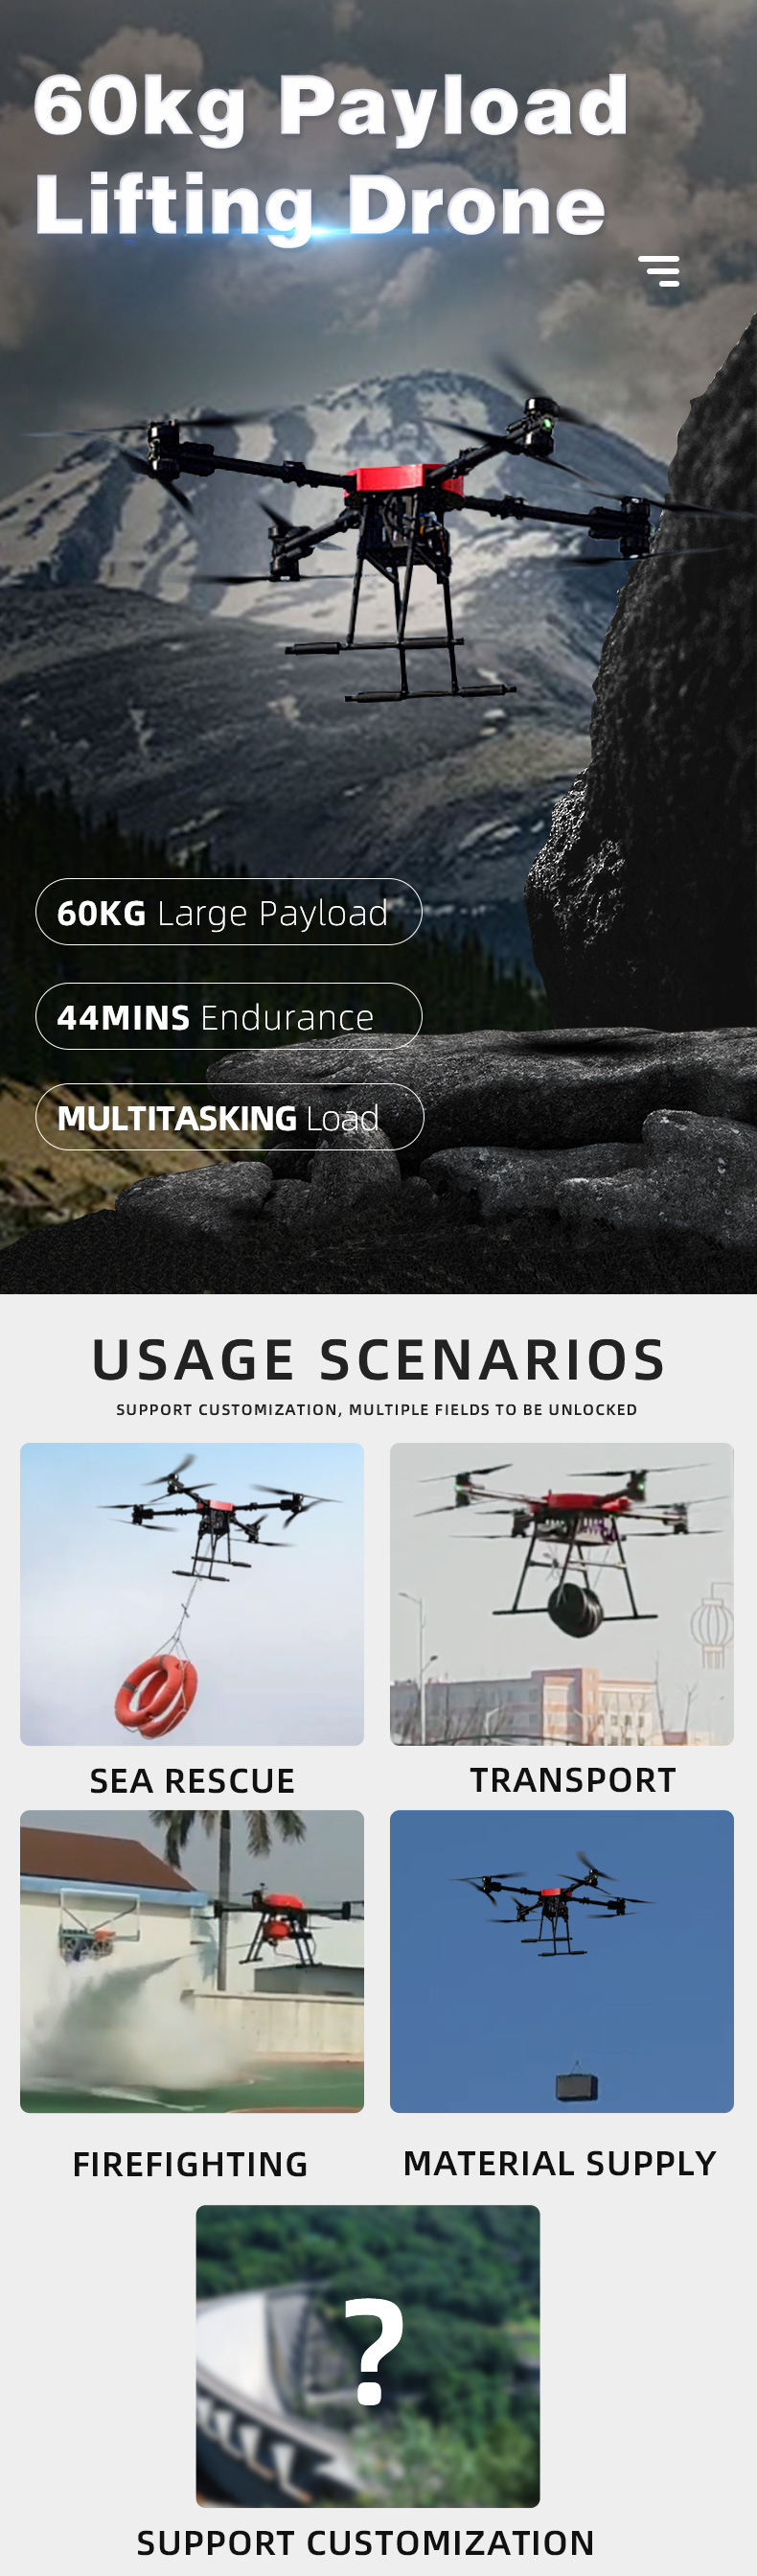 Signal Display Automatic Targeting and Return Long Distance 60kg Payload Rescue Drone